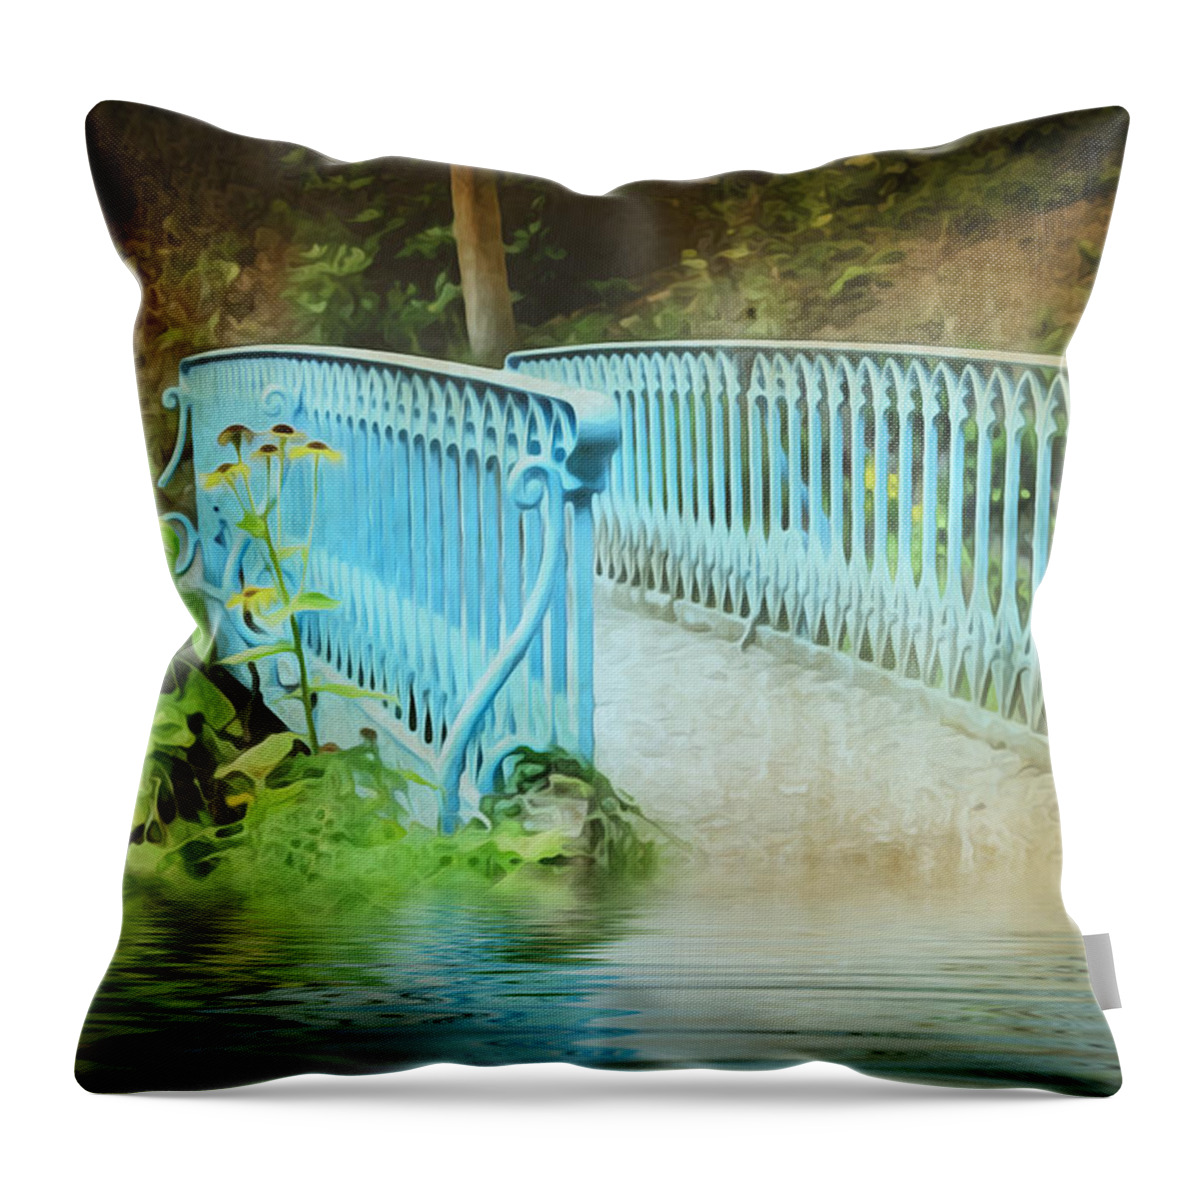 Background Throw Pillow featuring the photograph Blue Bridge by Svetlana Sewell